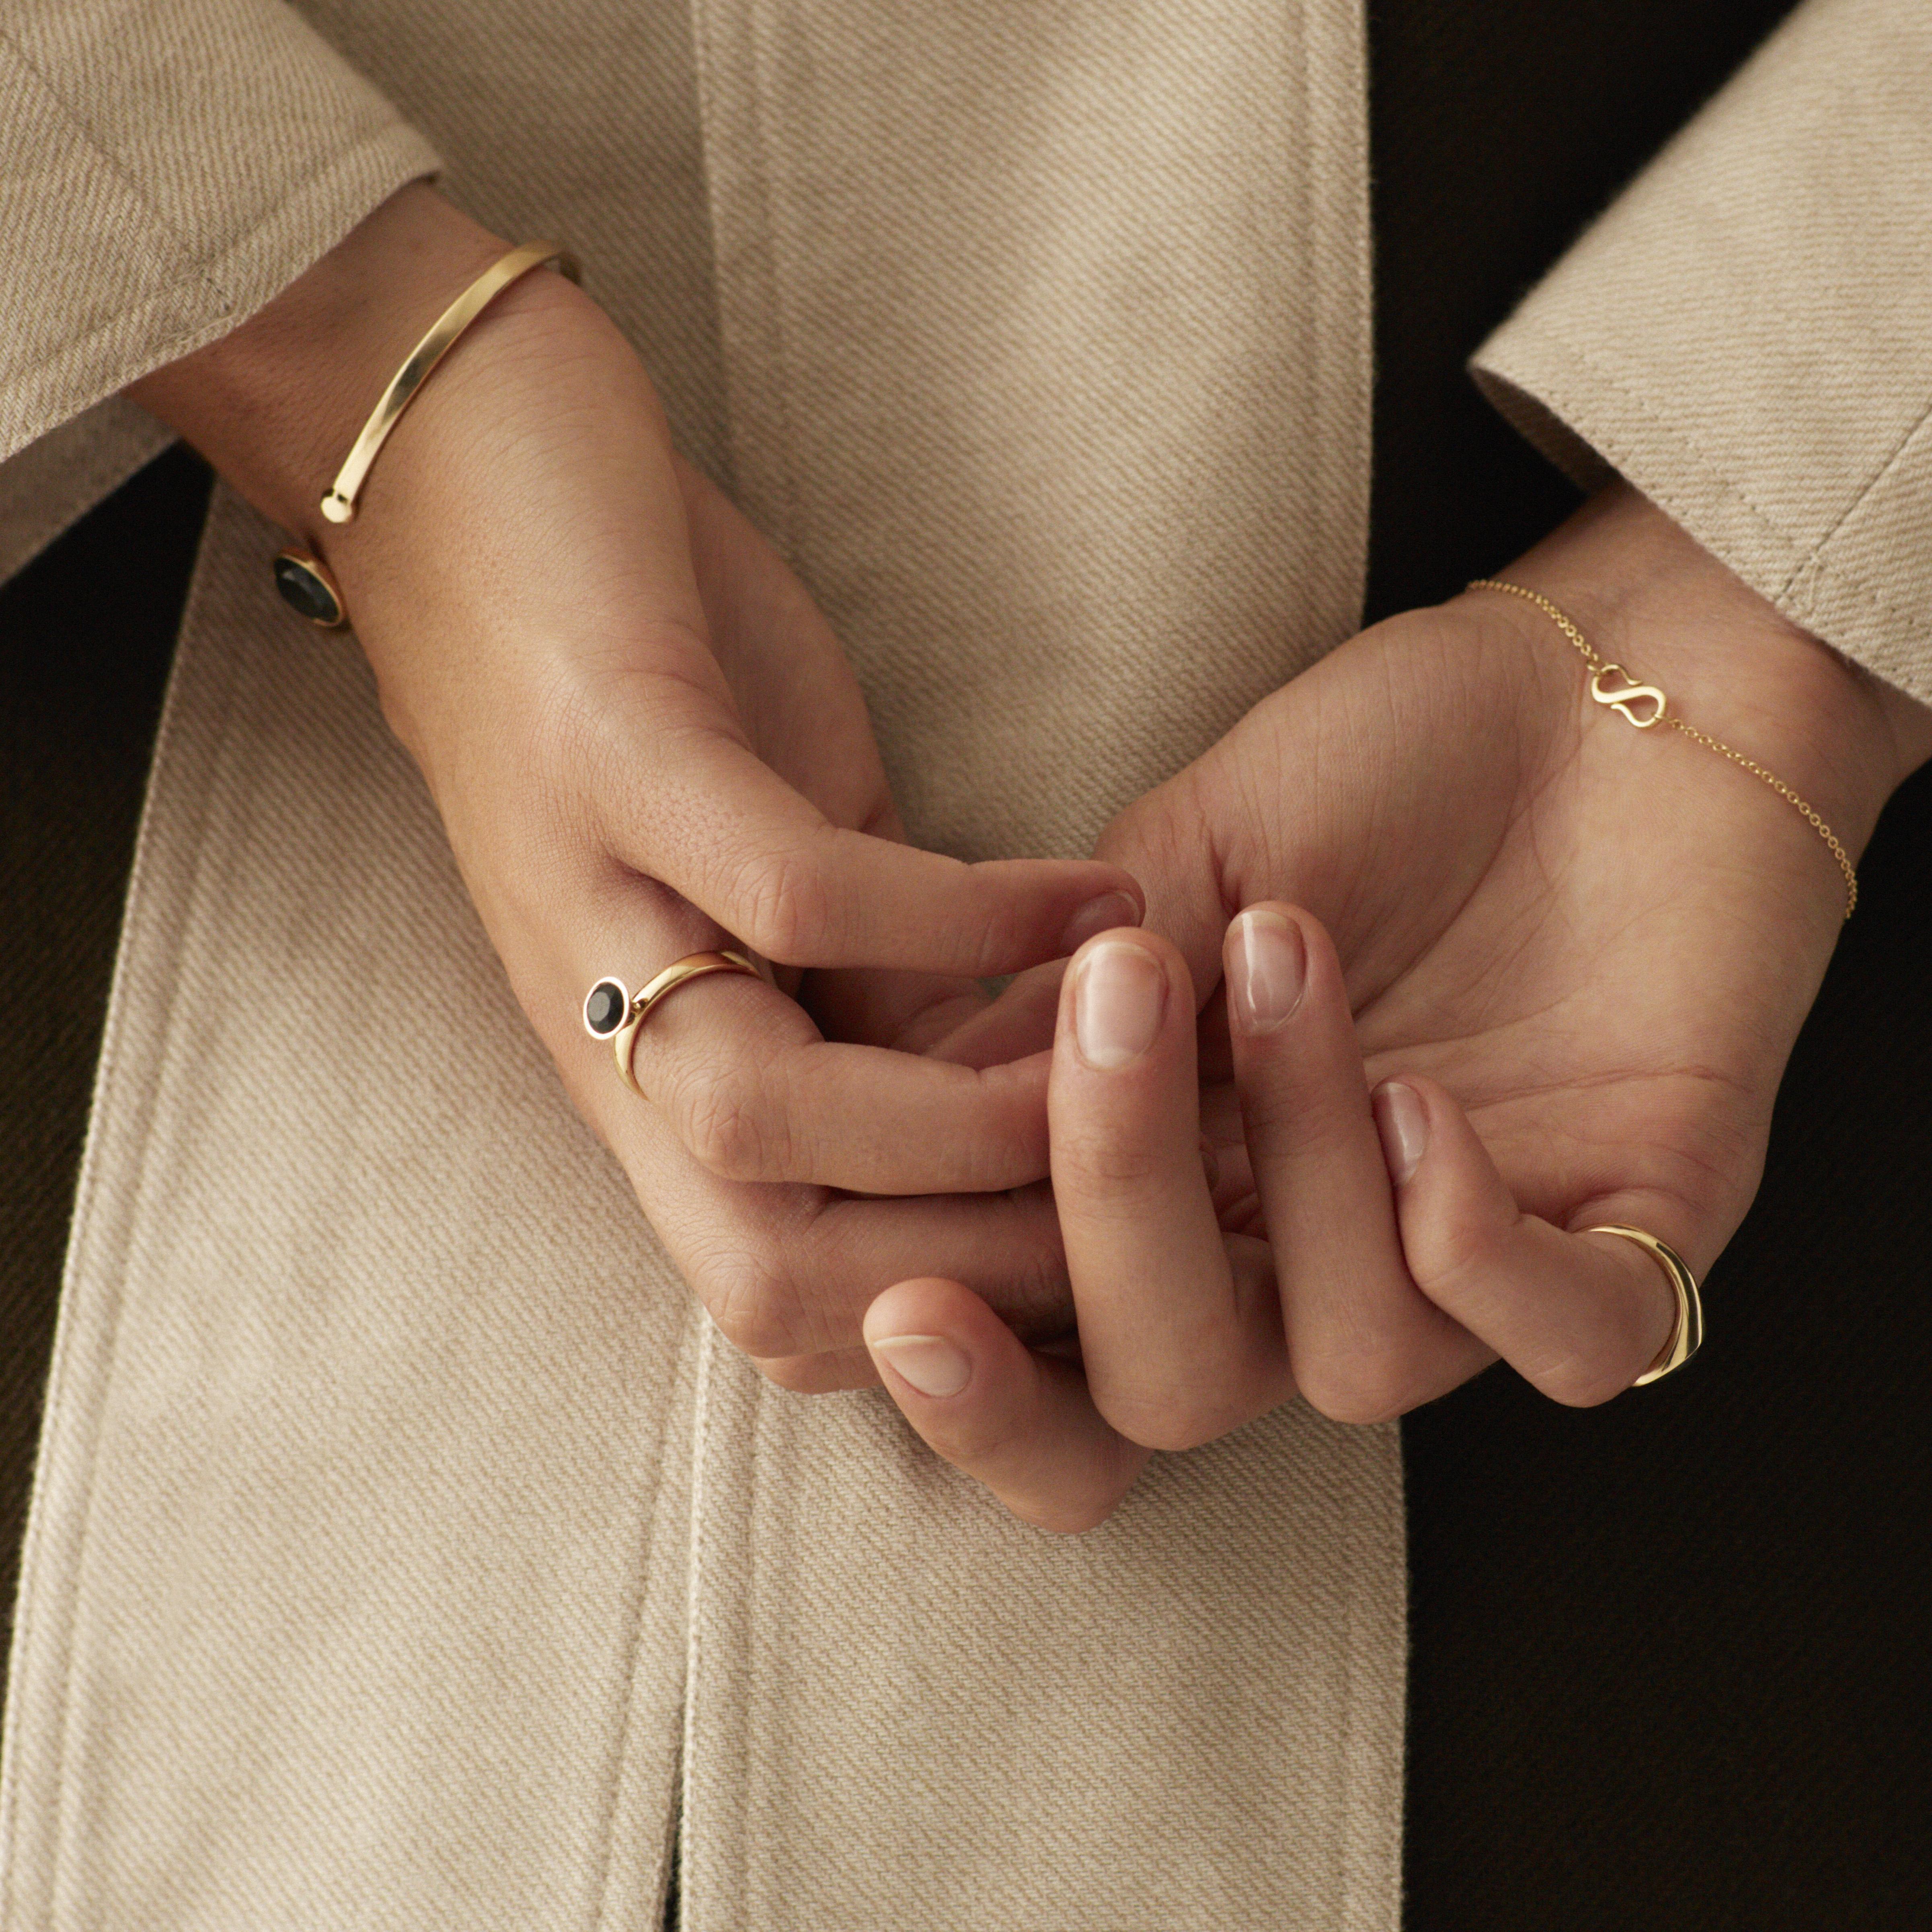 Inspired by the beautiful love poems and melancholic universe of Emily Dickinson, the Kindred Collection evolves around the signet family ring and the classic diamond full of symbolism – but in the gentle, sustainable version of a cut and polished